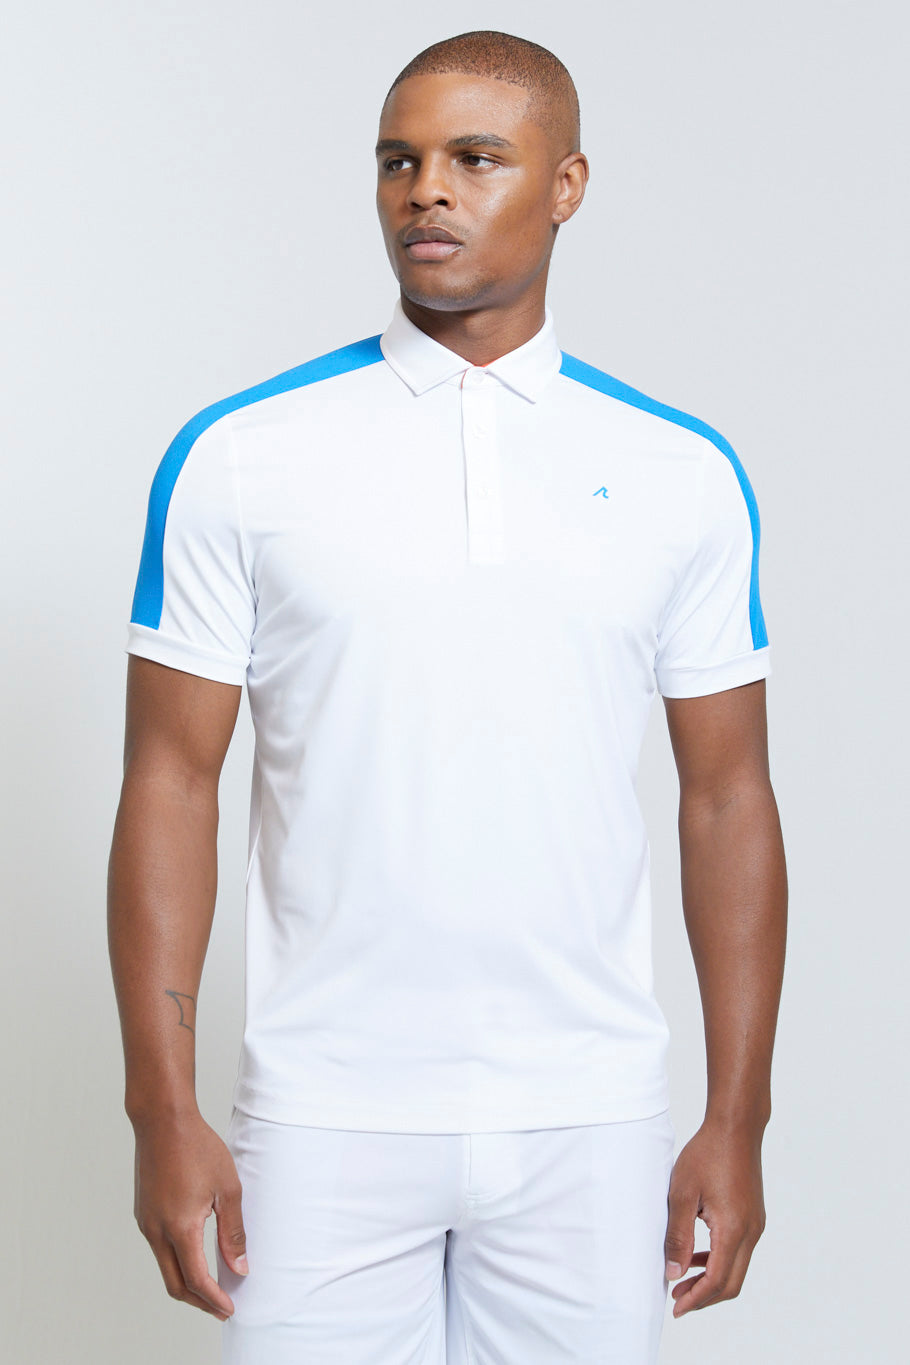 Editor interview Hotellet Evans Men's Athletic Polo Shirt in White – REDVANLY